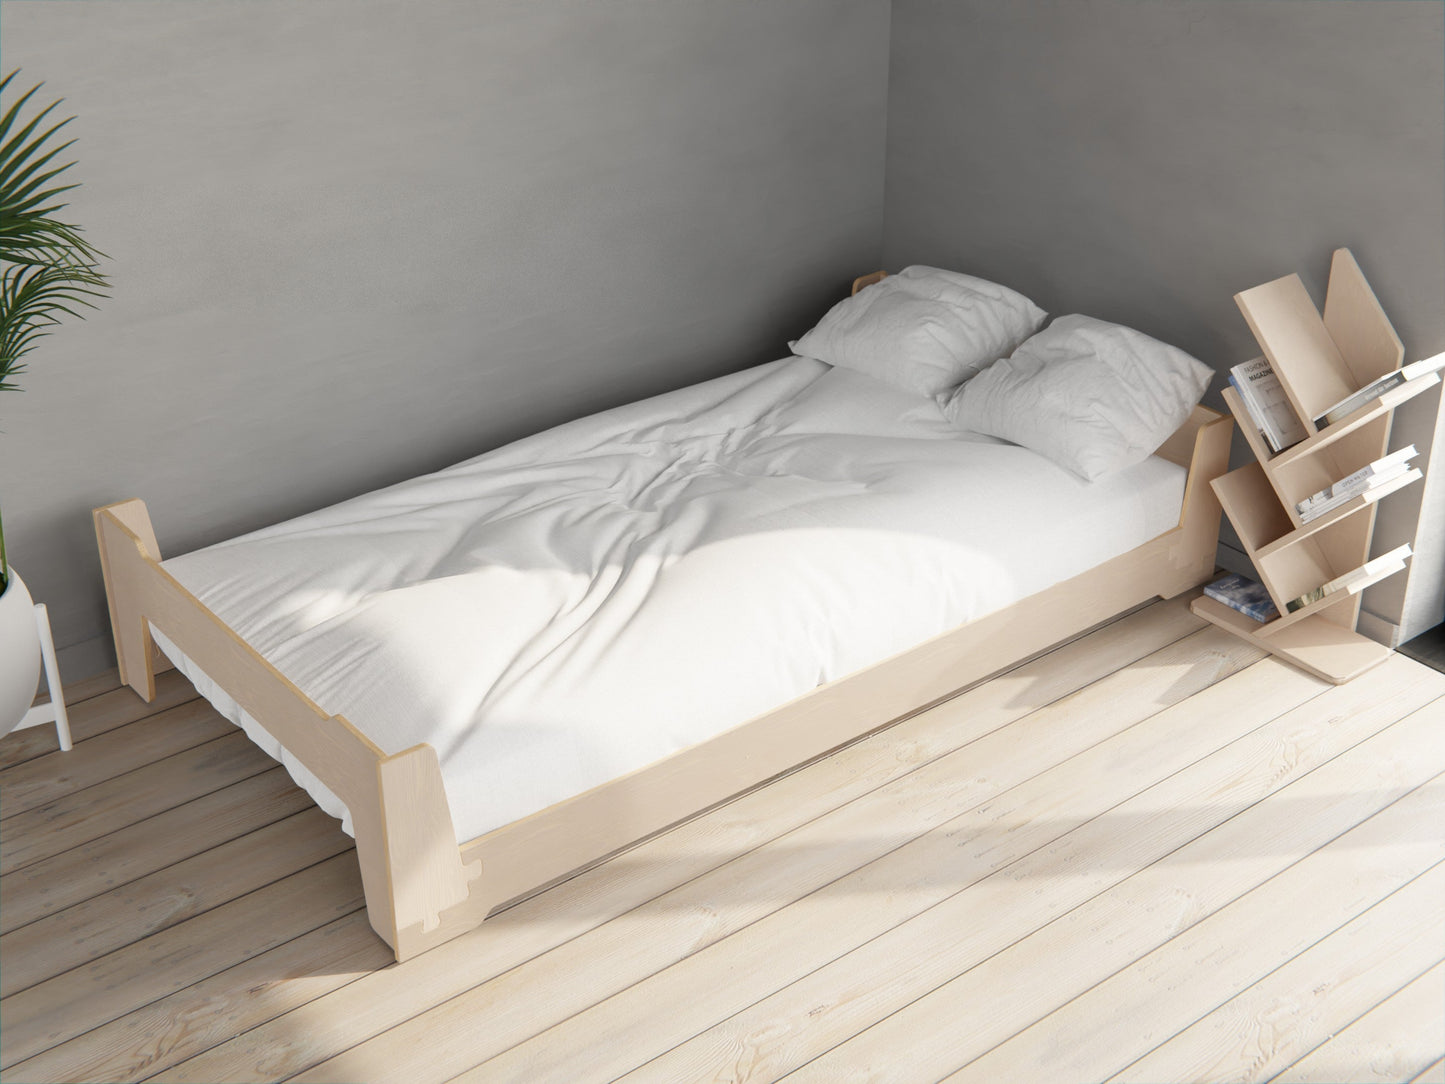 Special offer flippable bed frame with discount.